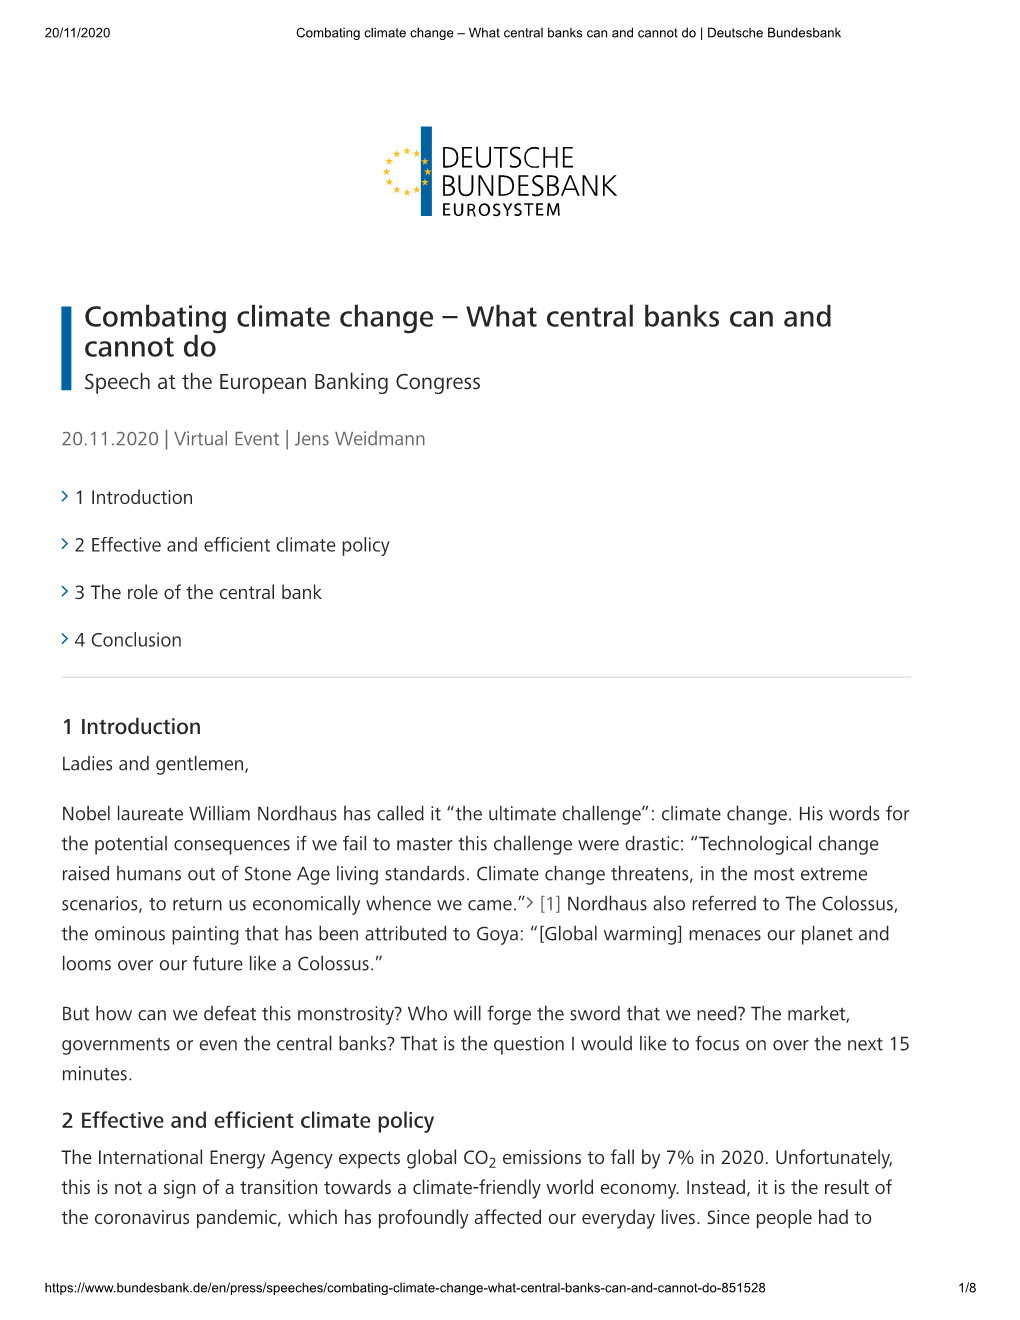 Jens Weidmann: Combating Climate Change – What Central Banks Can